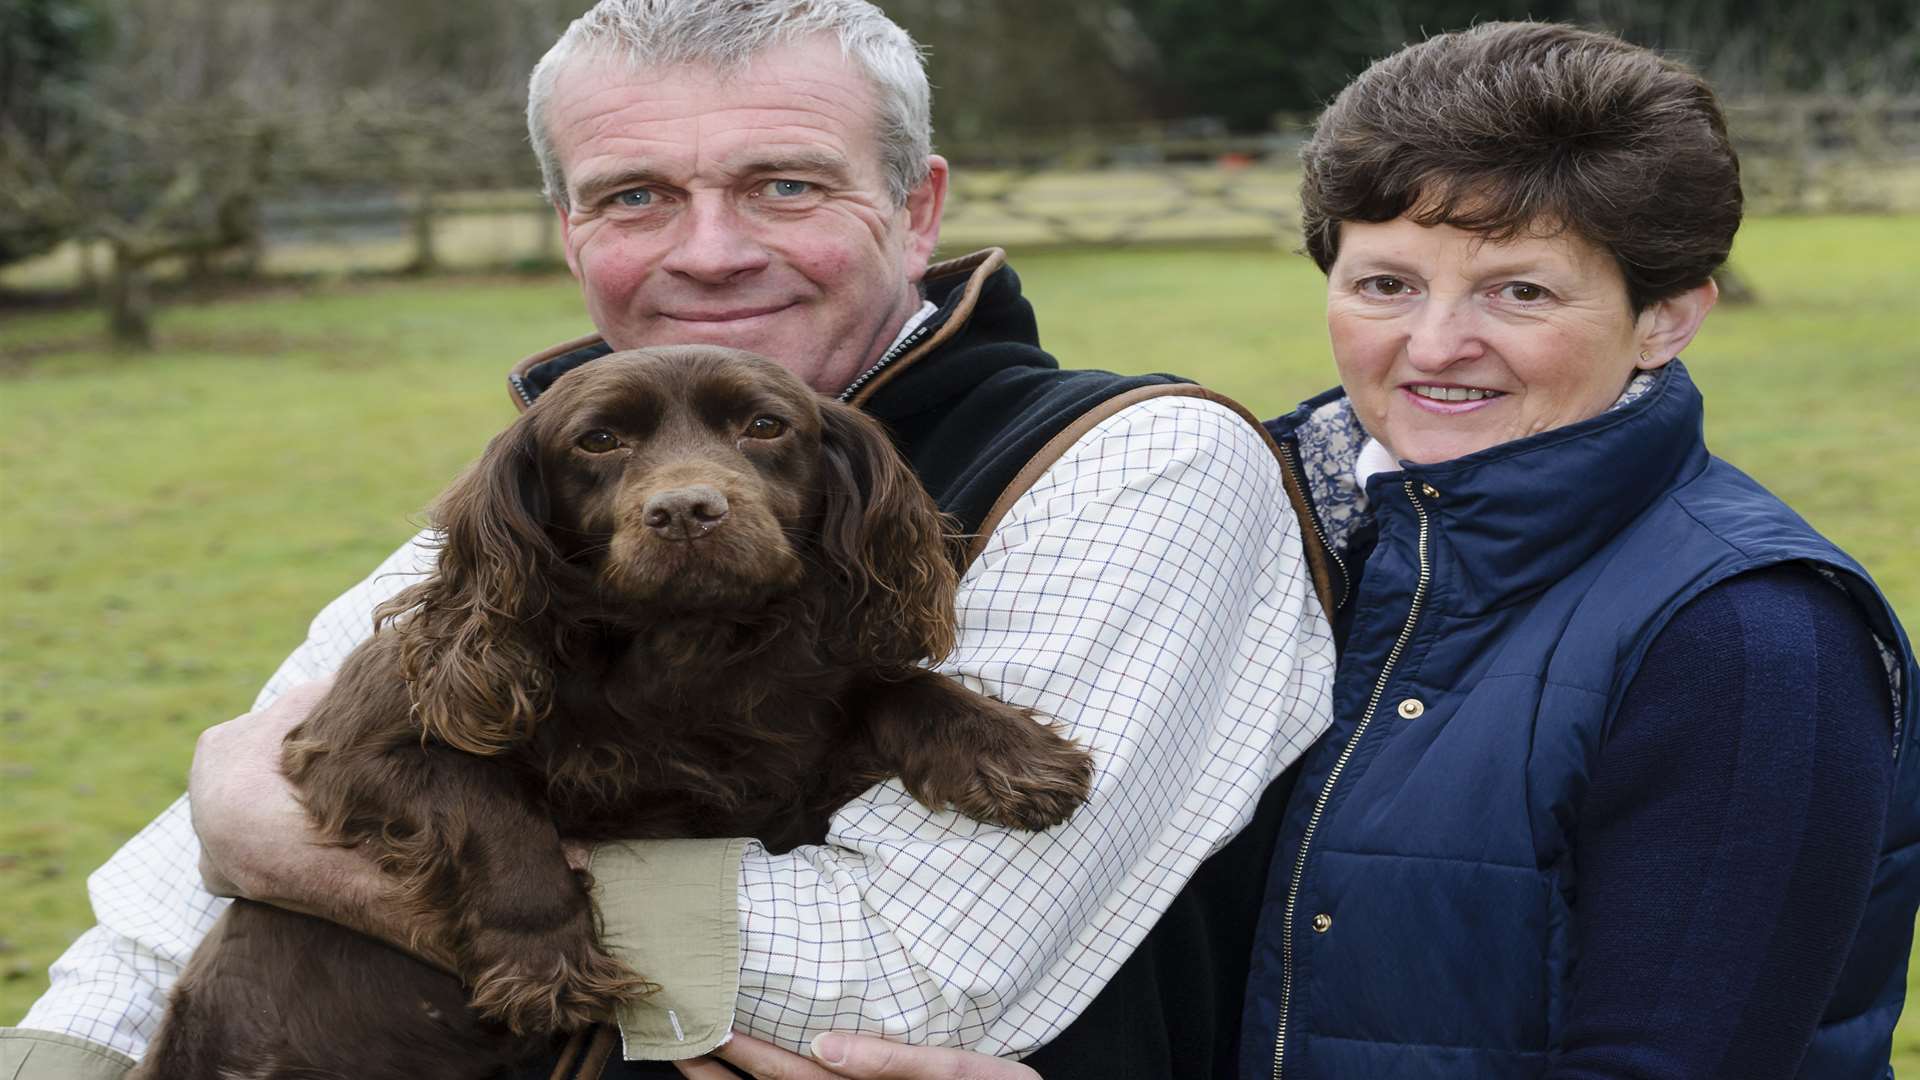 Islay has been reunited with her owners Graham and Tina Denning